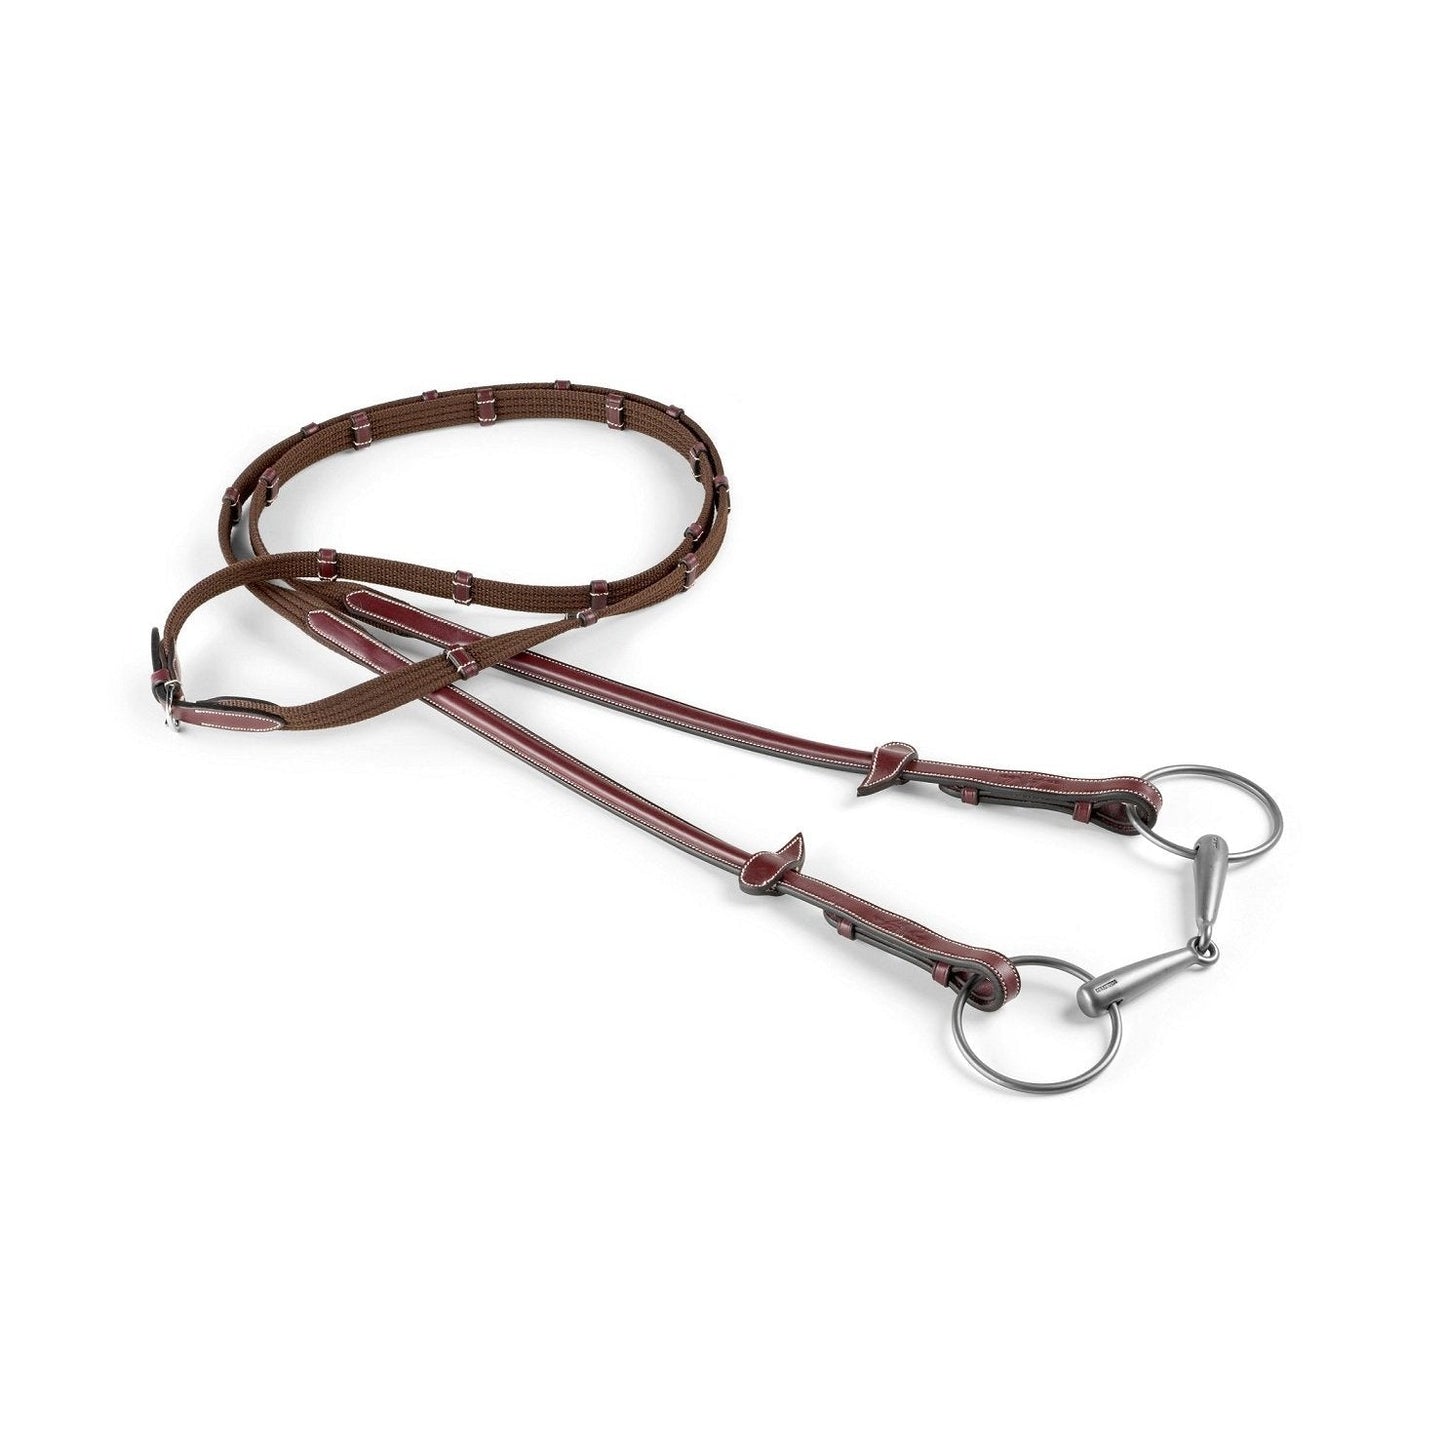 Equipe bridle in brown leather, classic style, isolated on white background.